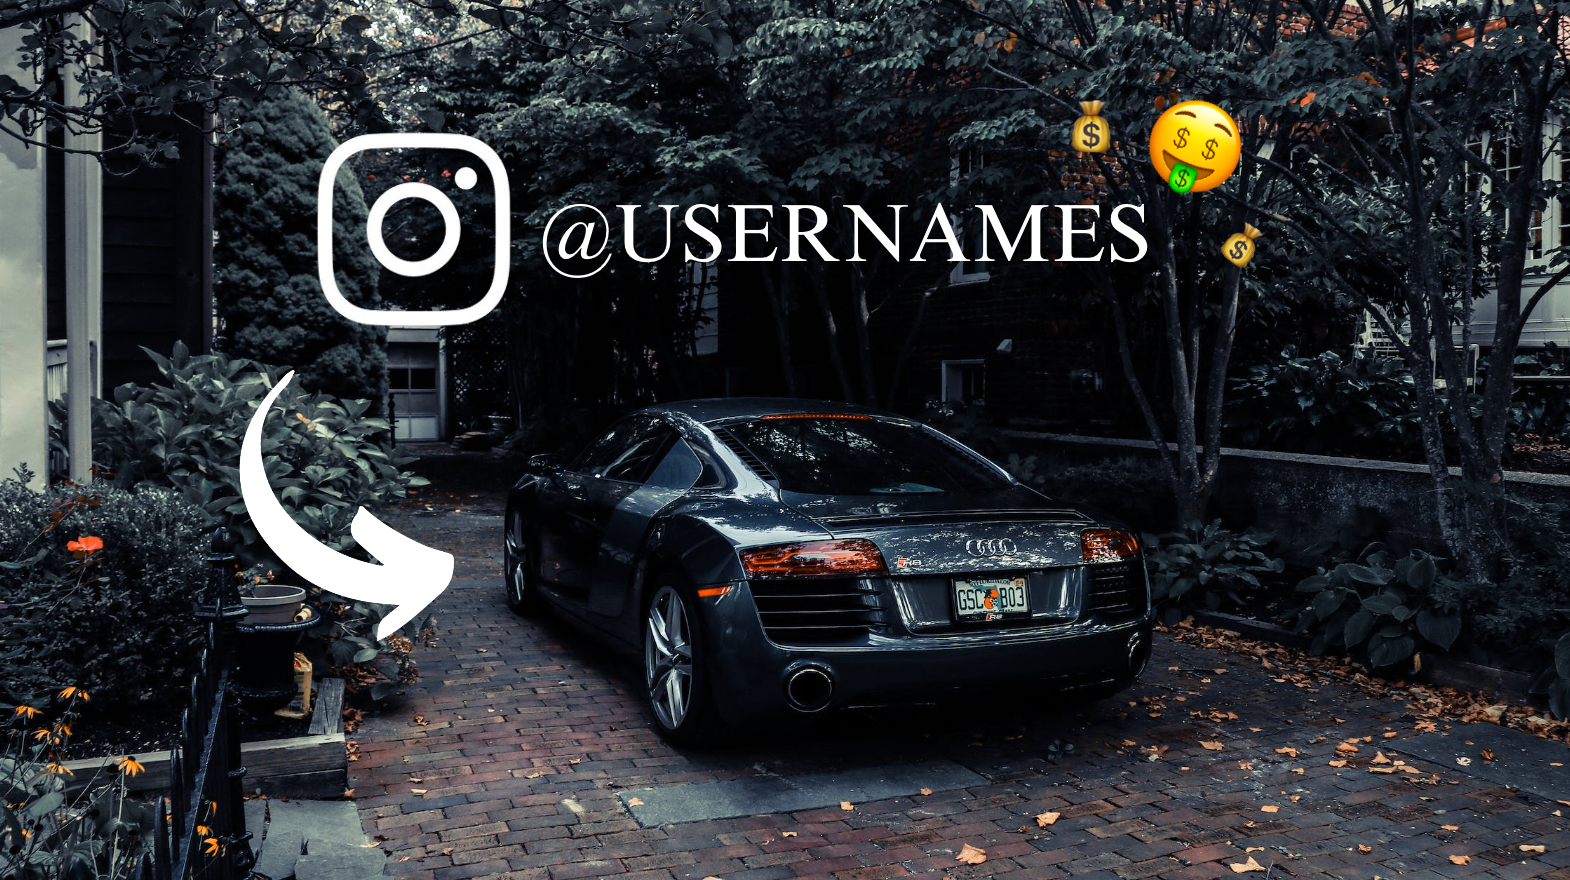 <div>Coveted @USERNAMES on Instagram is the New Dot Com & how to acquire one!</div>